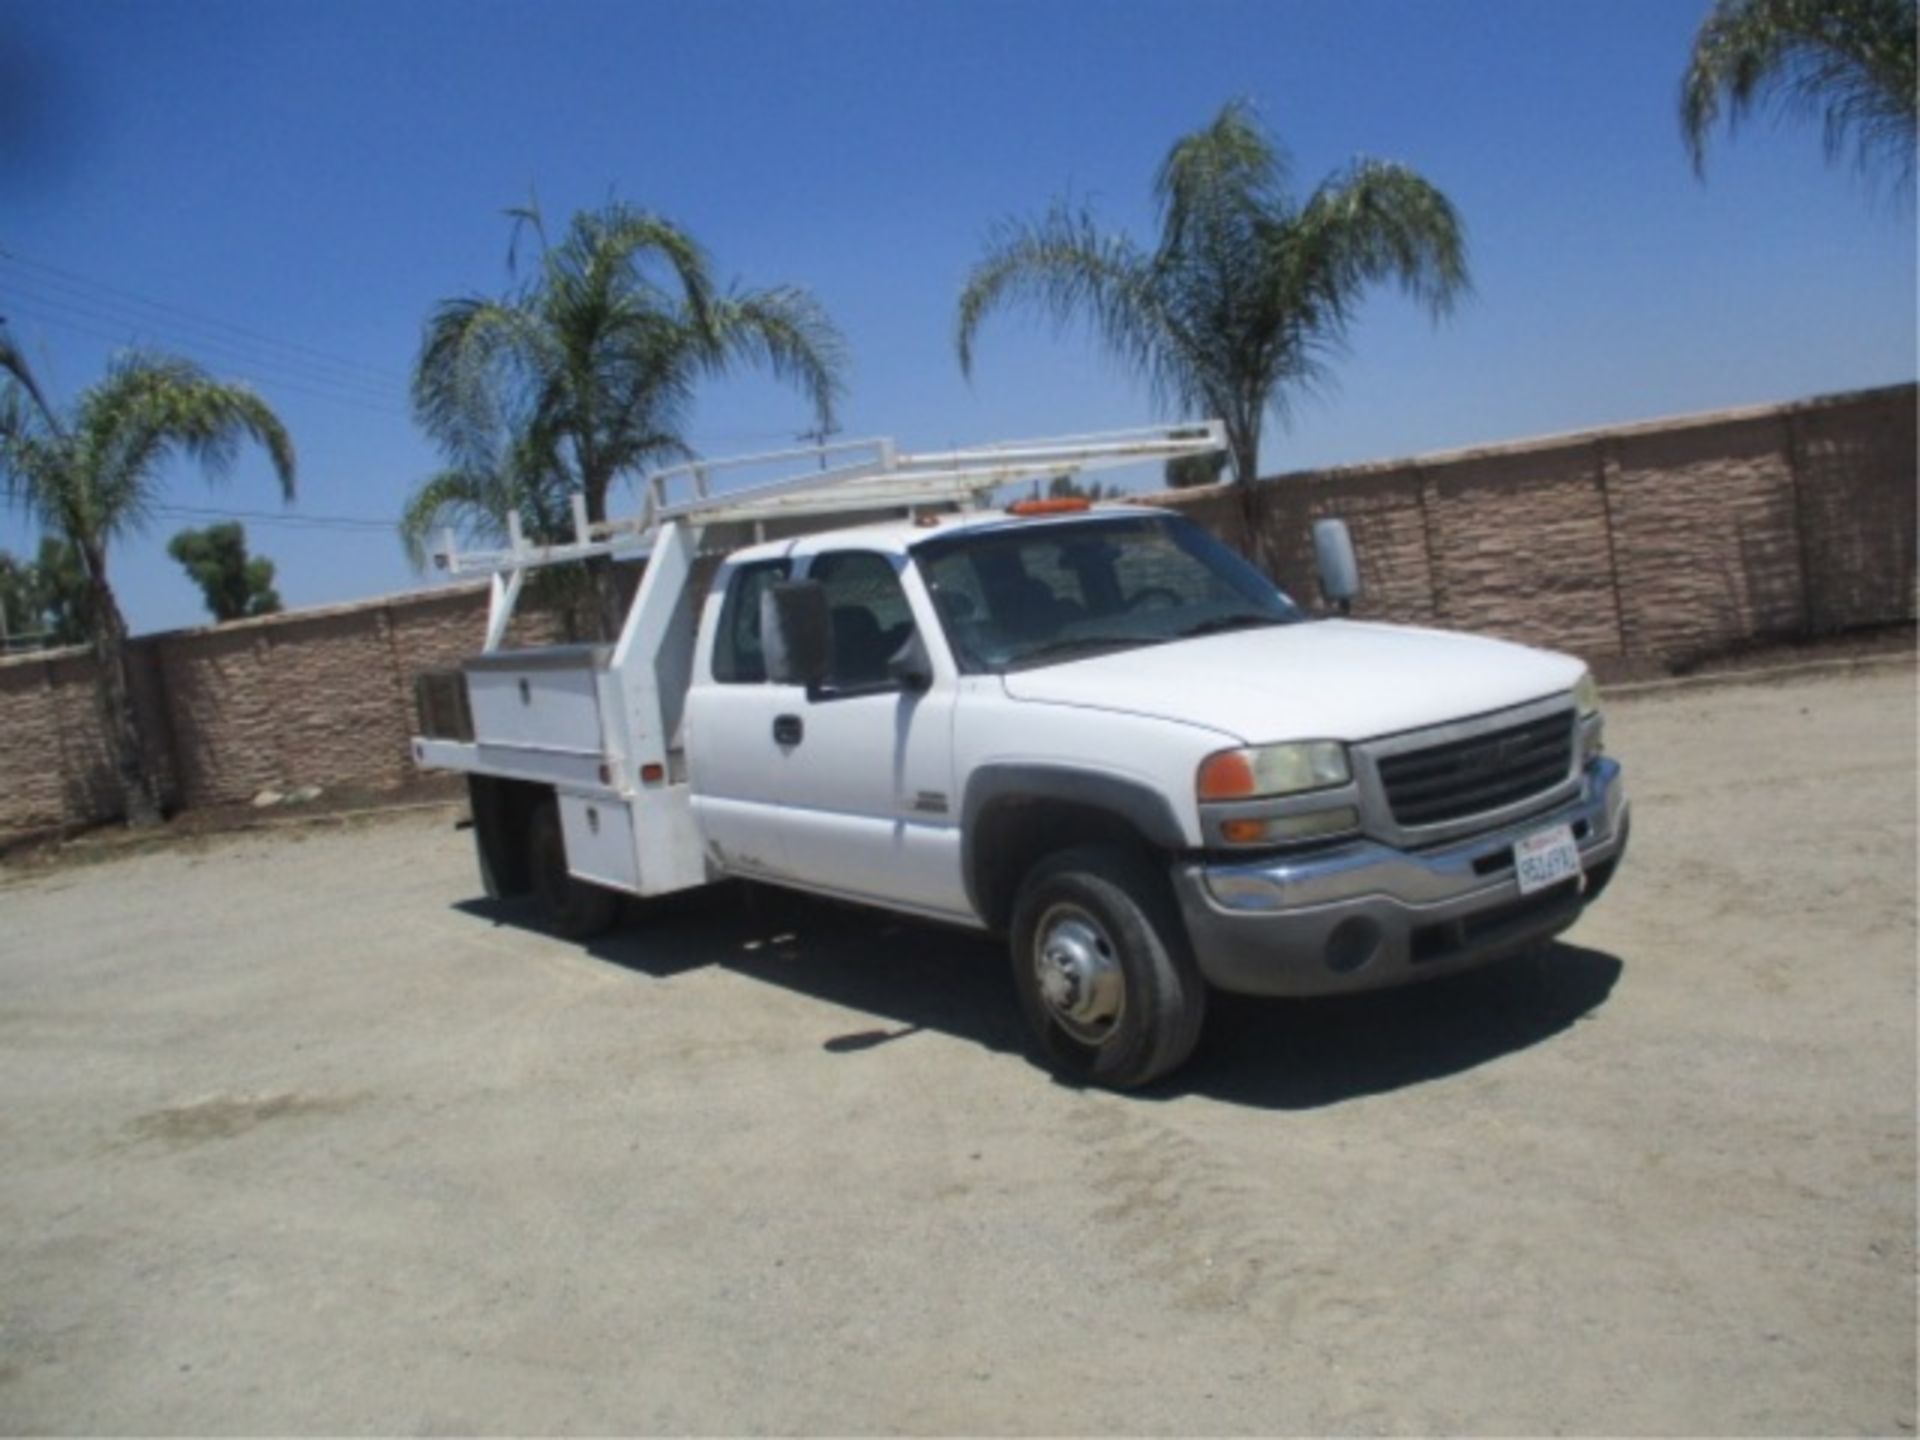 2006 Chevrolet 3500 Extended-Cab Utility Truck, 6.6L Turbo Diesel, Automatic, Tool Boxes, Lumber - Image 7 of 71